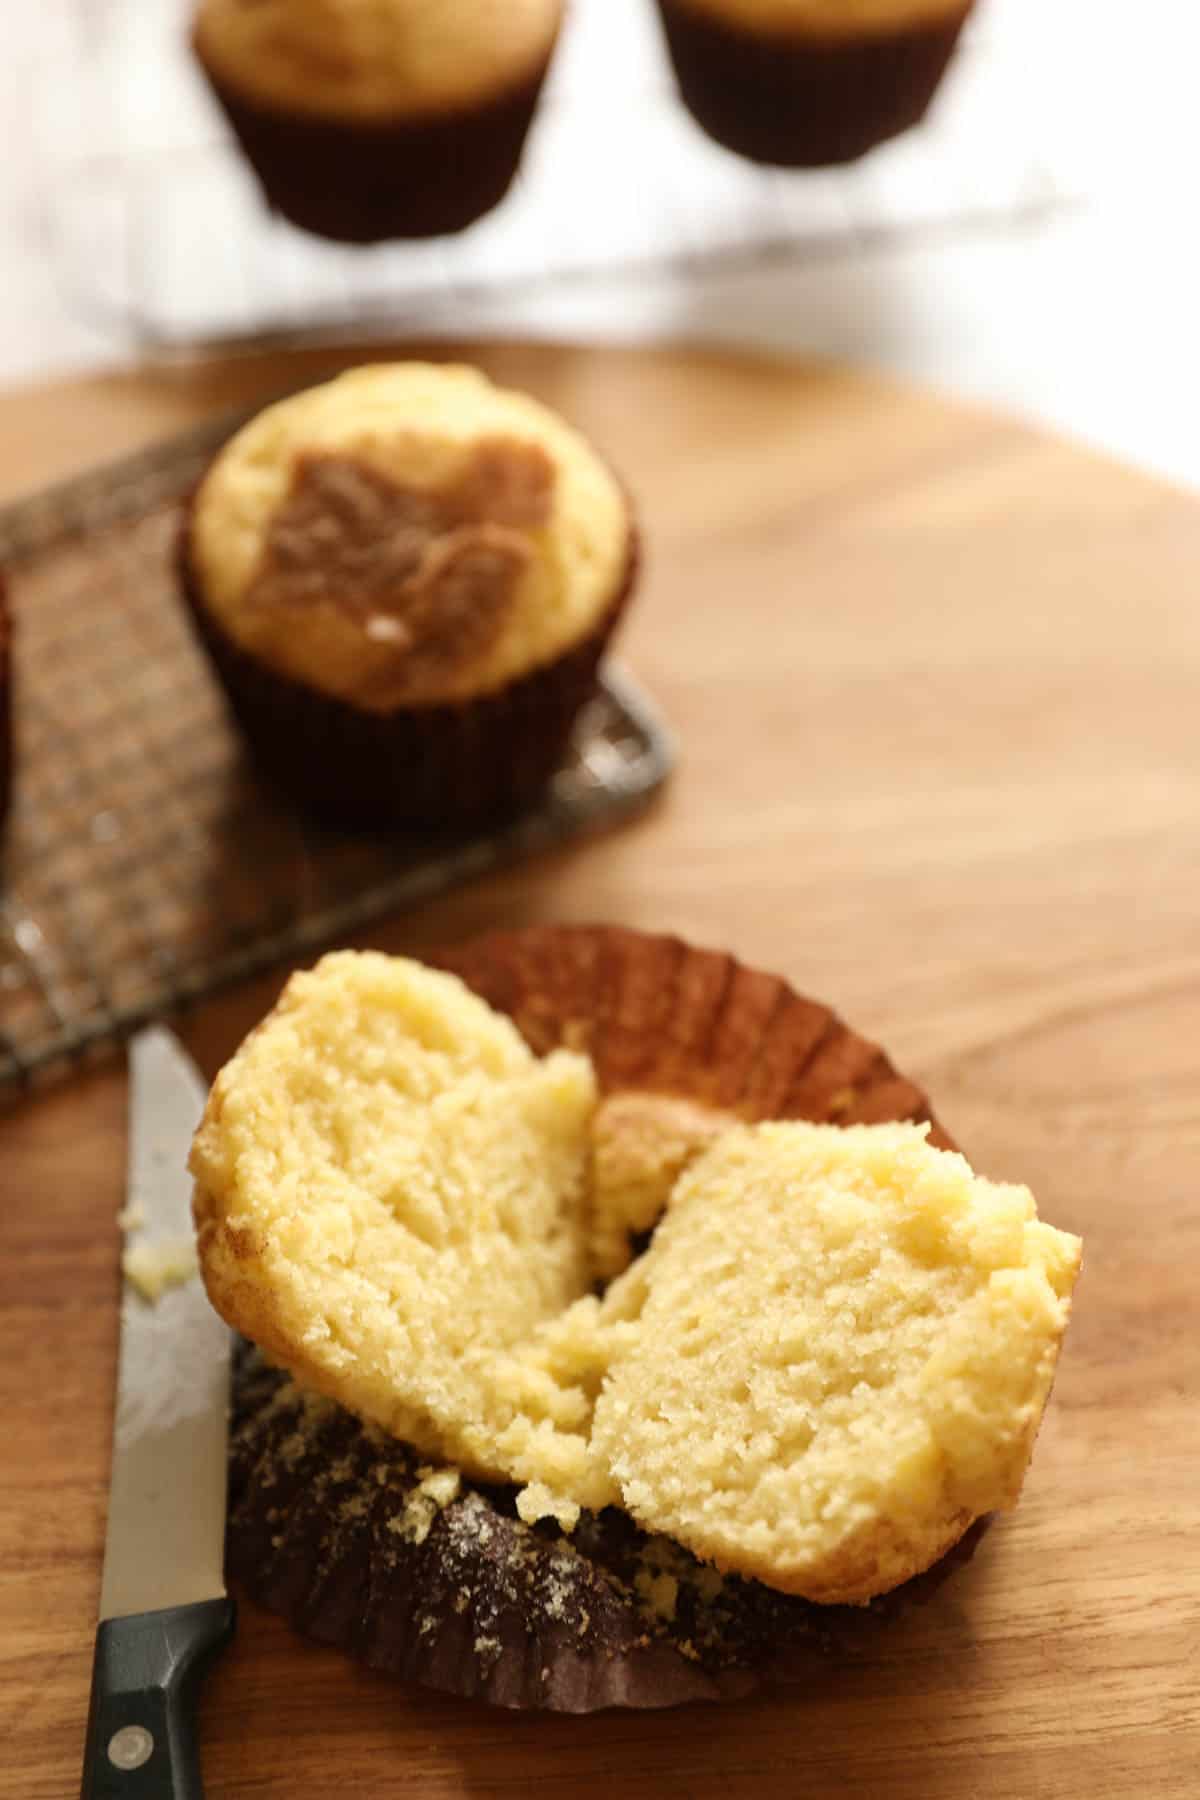 a muffin cut open showing the soft and moist texture